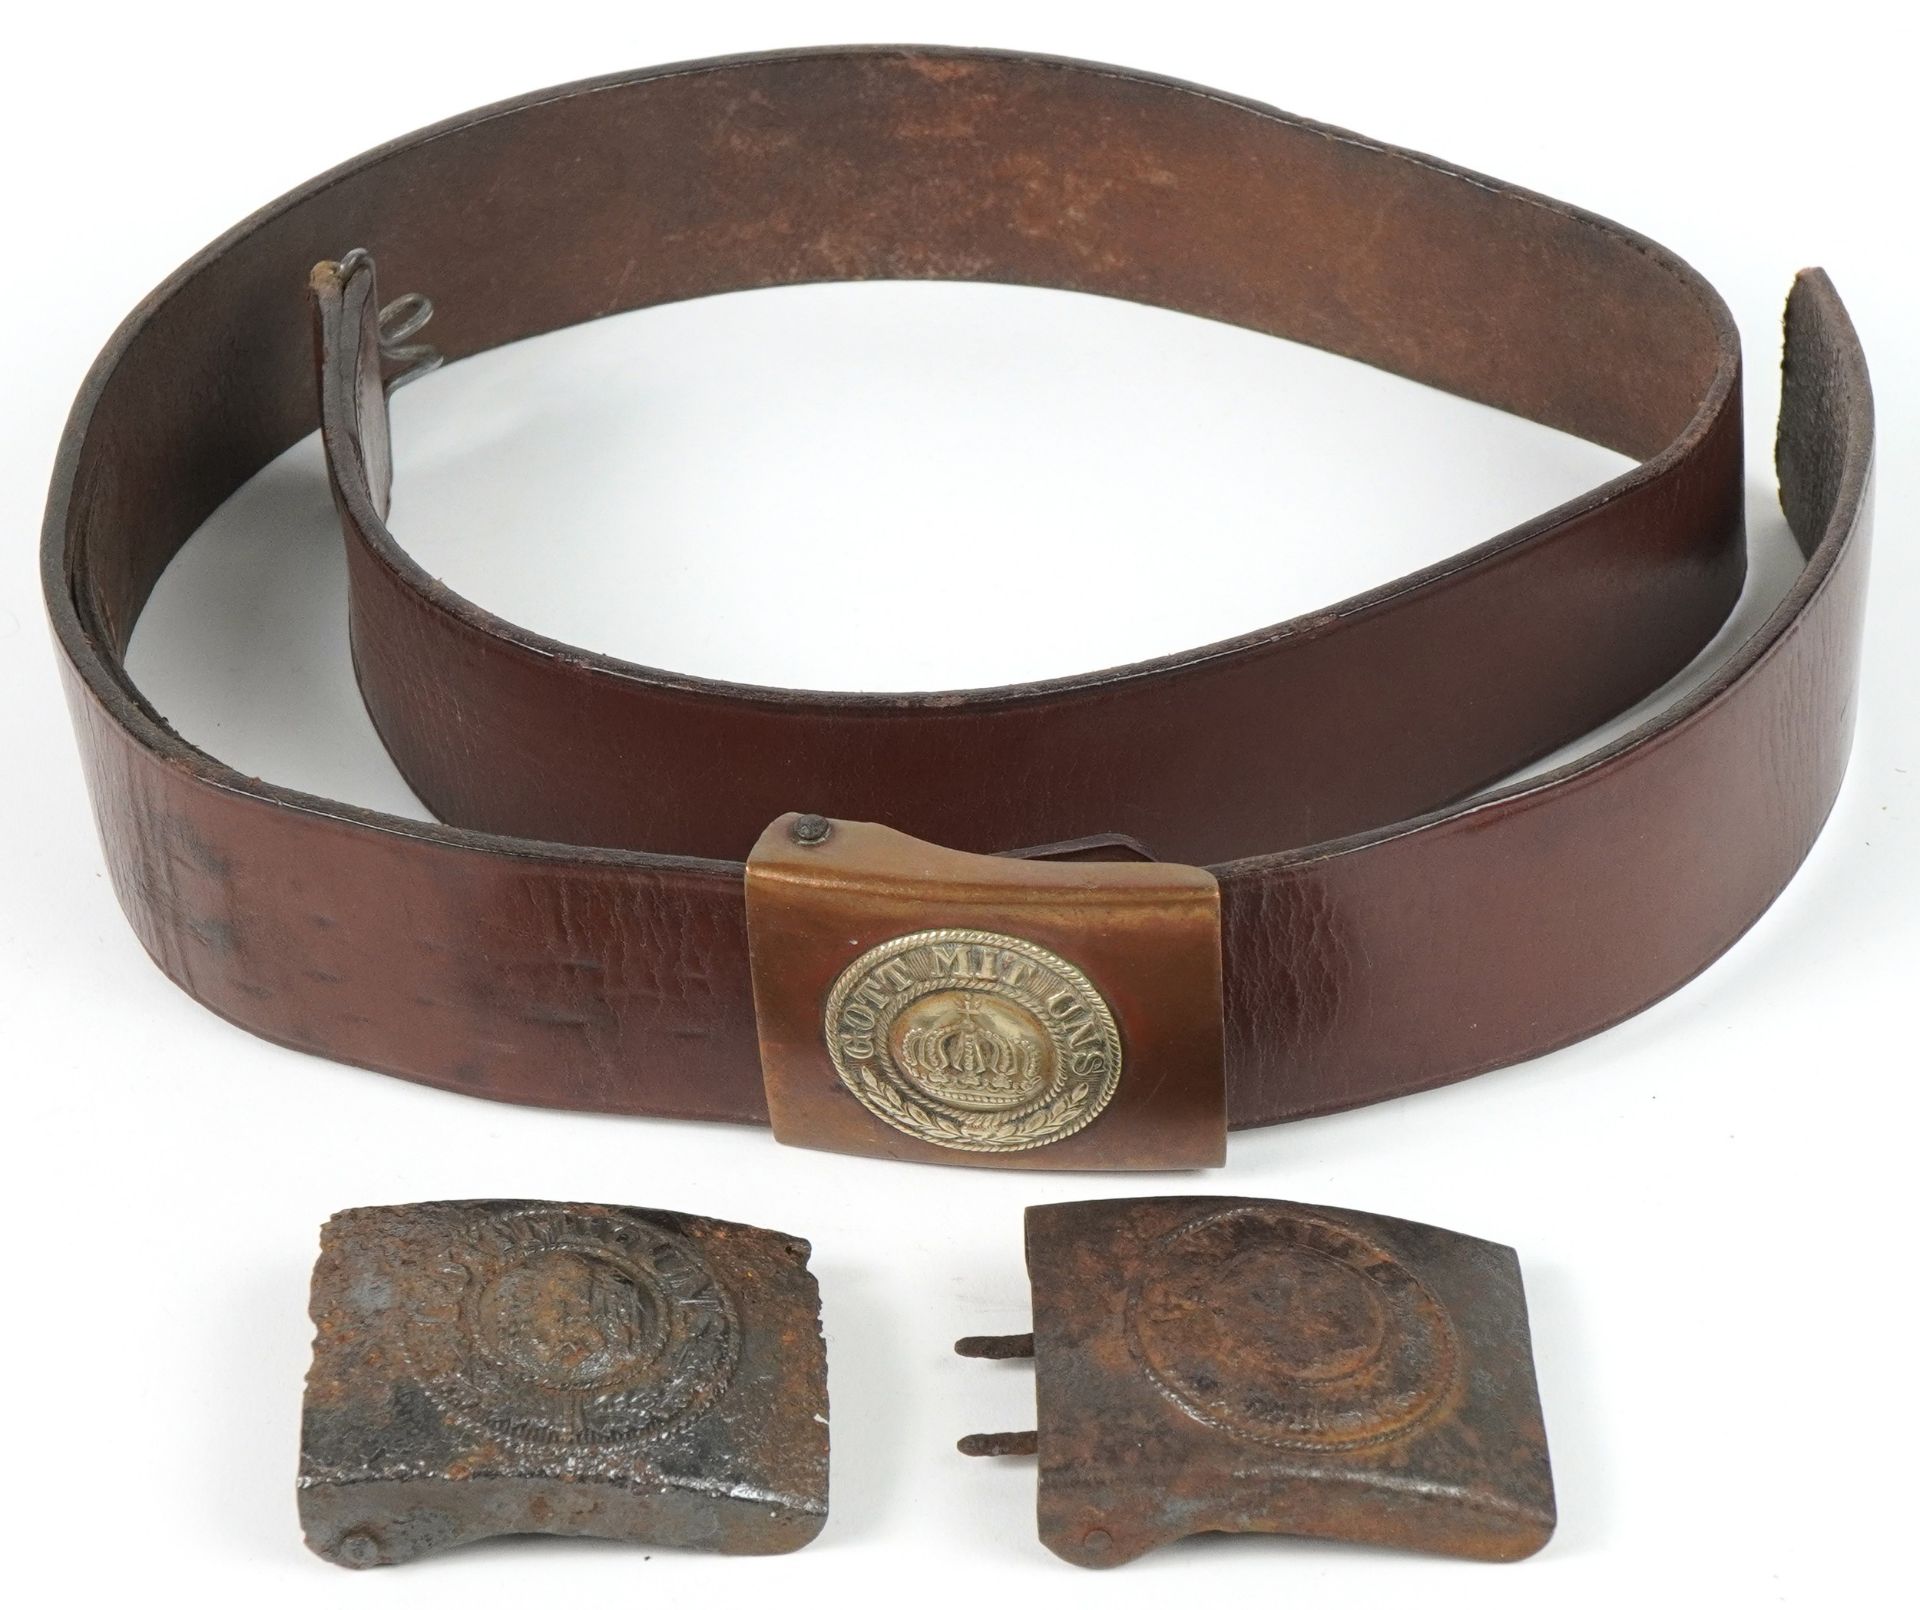 Three German military interest buckles including one on leather belt : For further information on